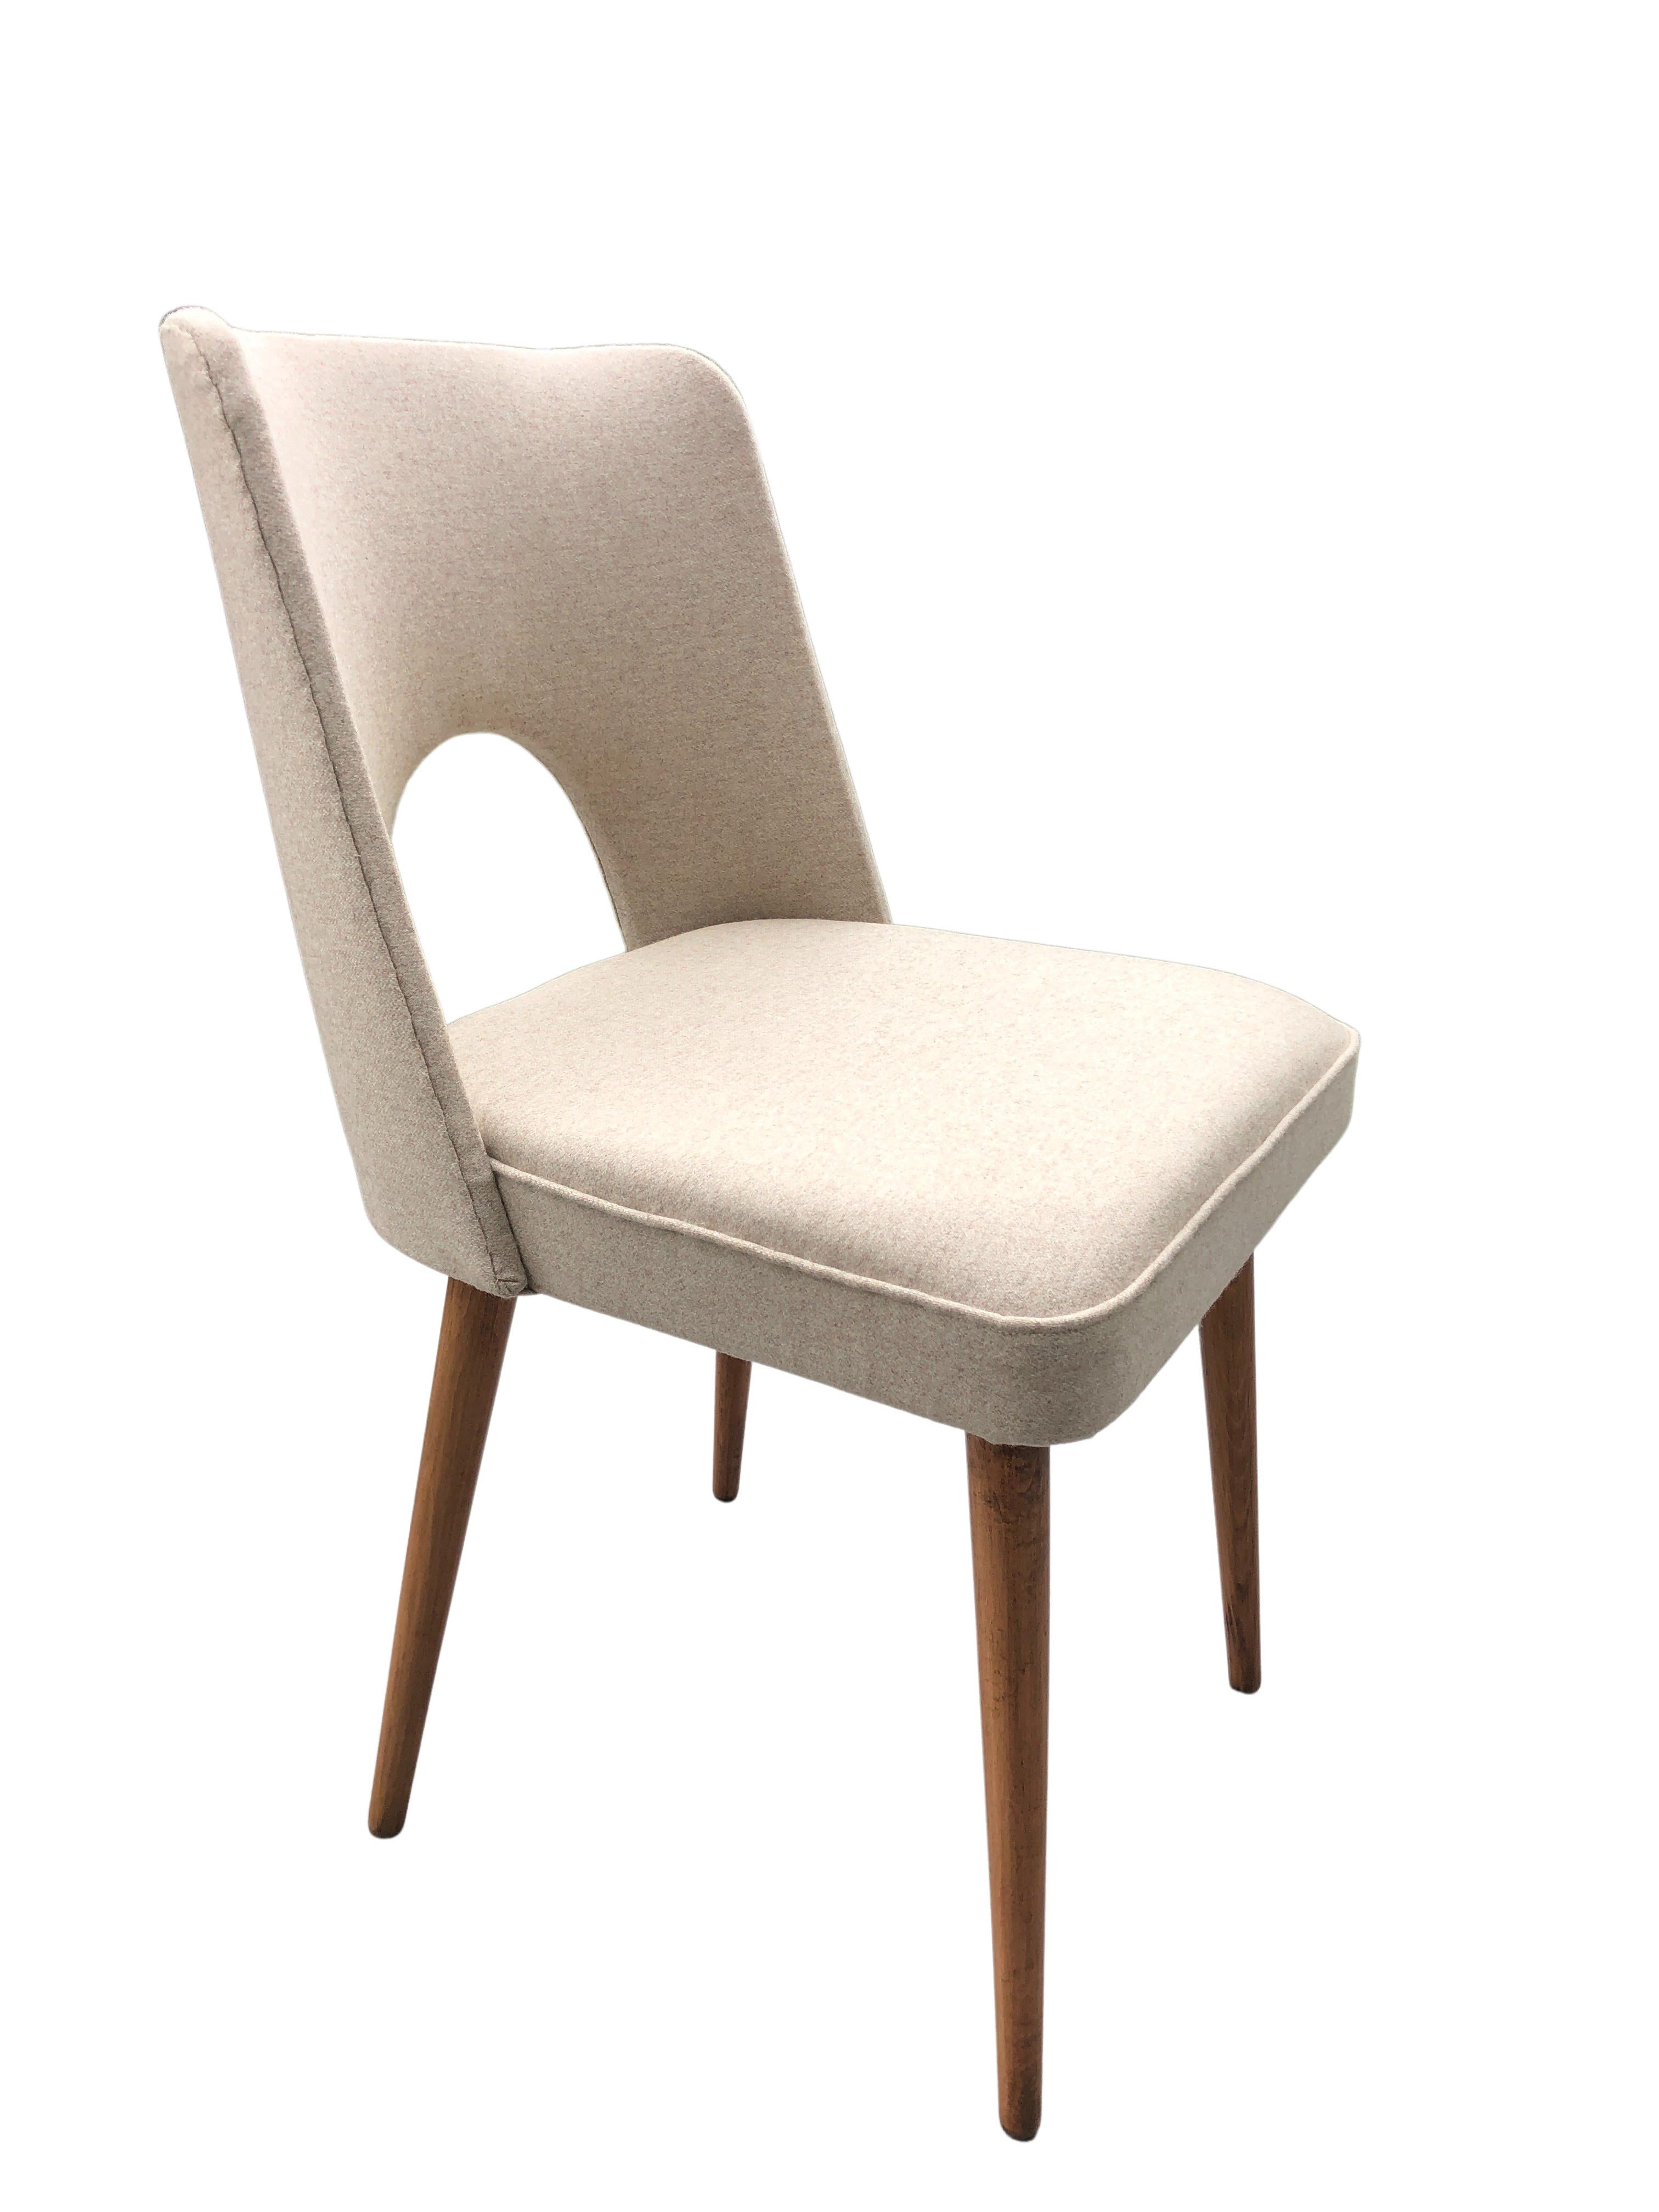 Beige Wool Shell Dining Chair by Lesniewski, 1960s For Sale 4